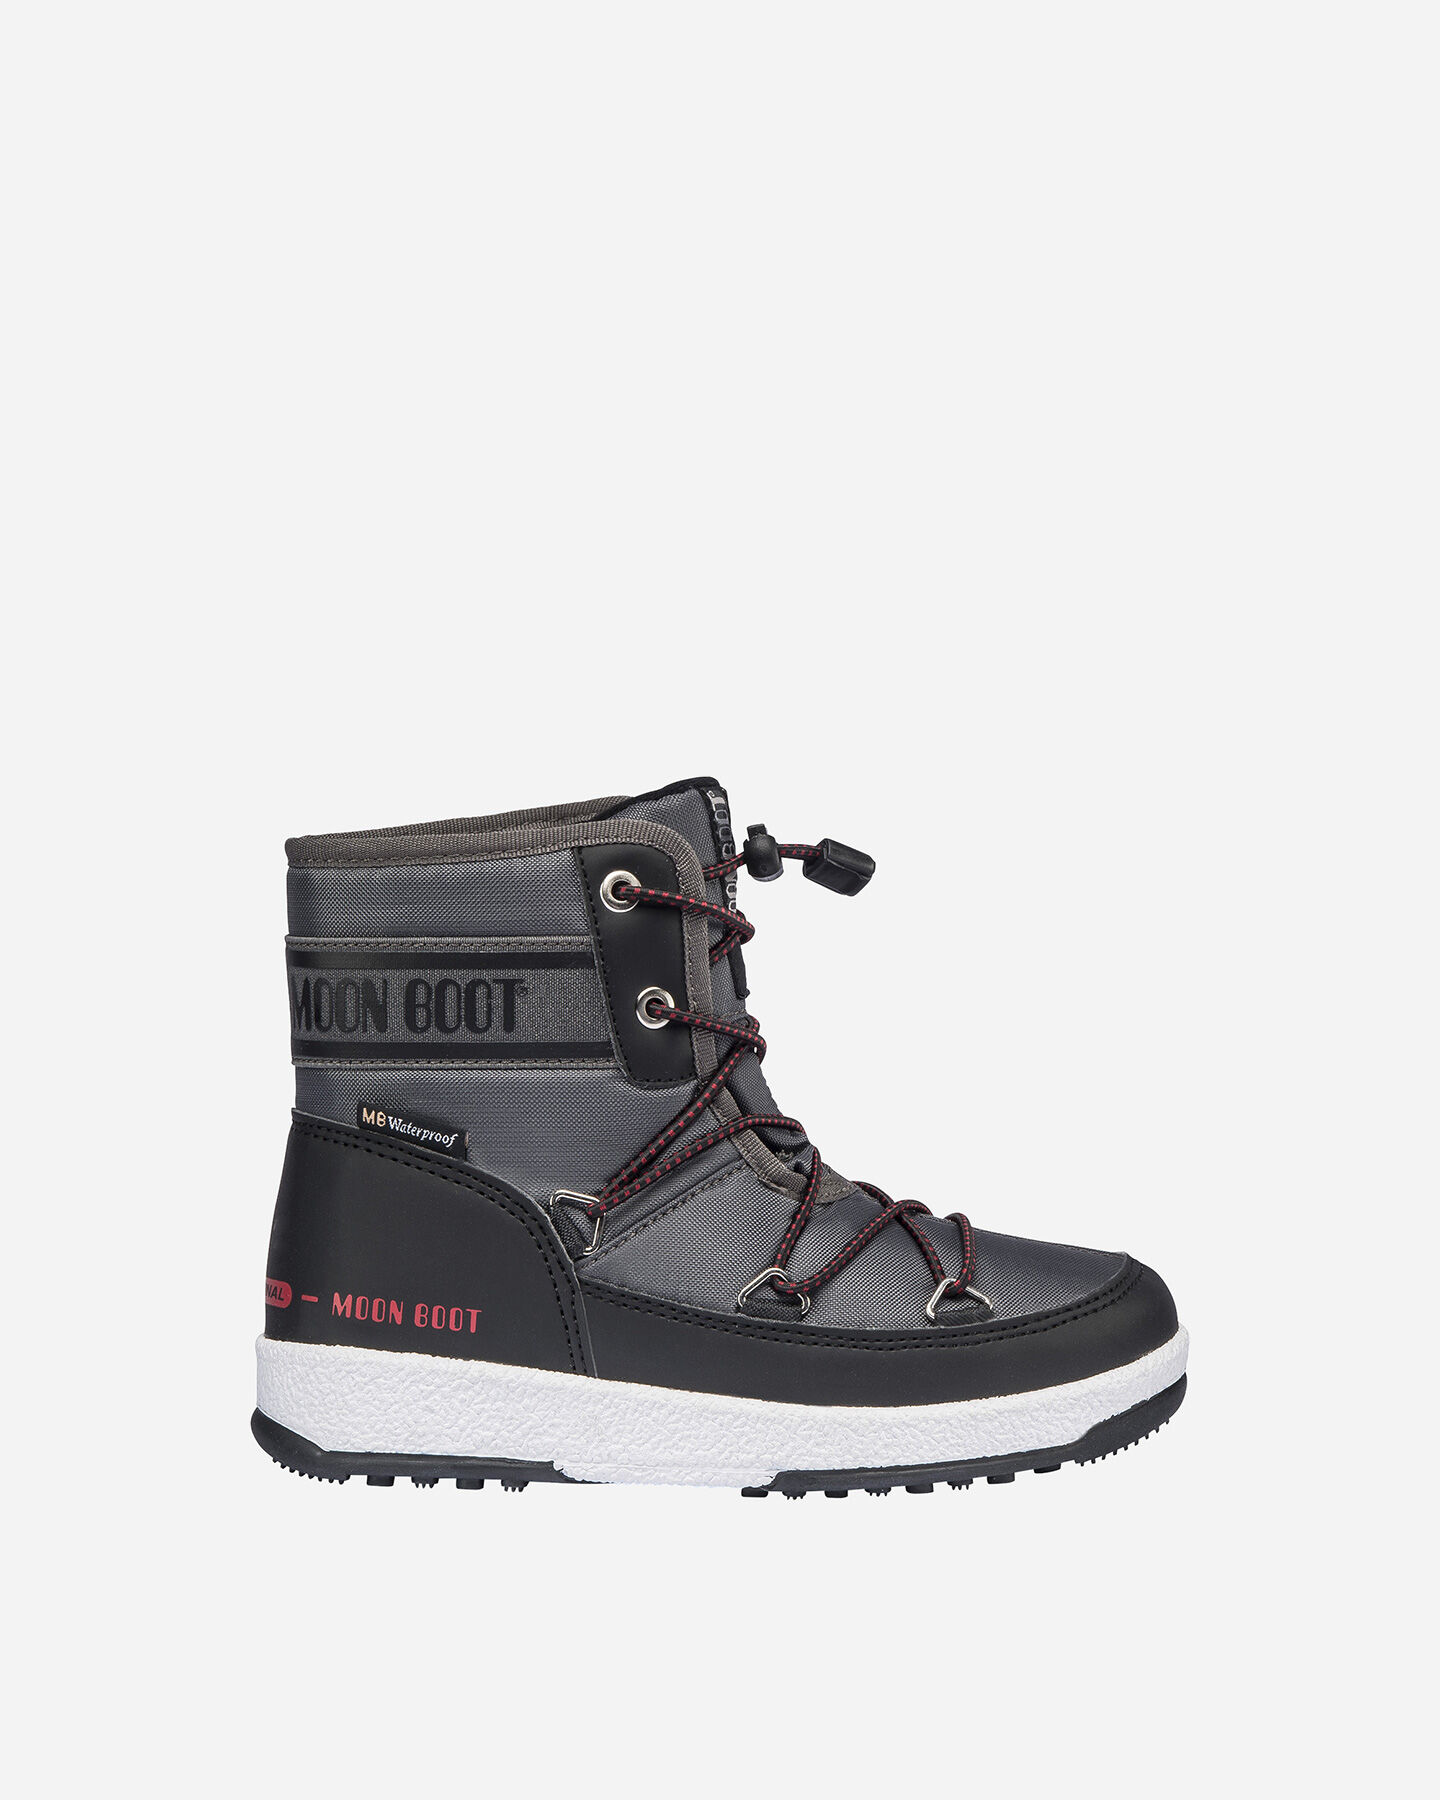  Doposci MOON BOOT MID WP JR S5247624|002|27 scatto 0